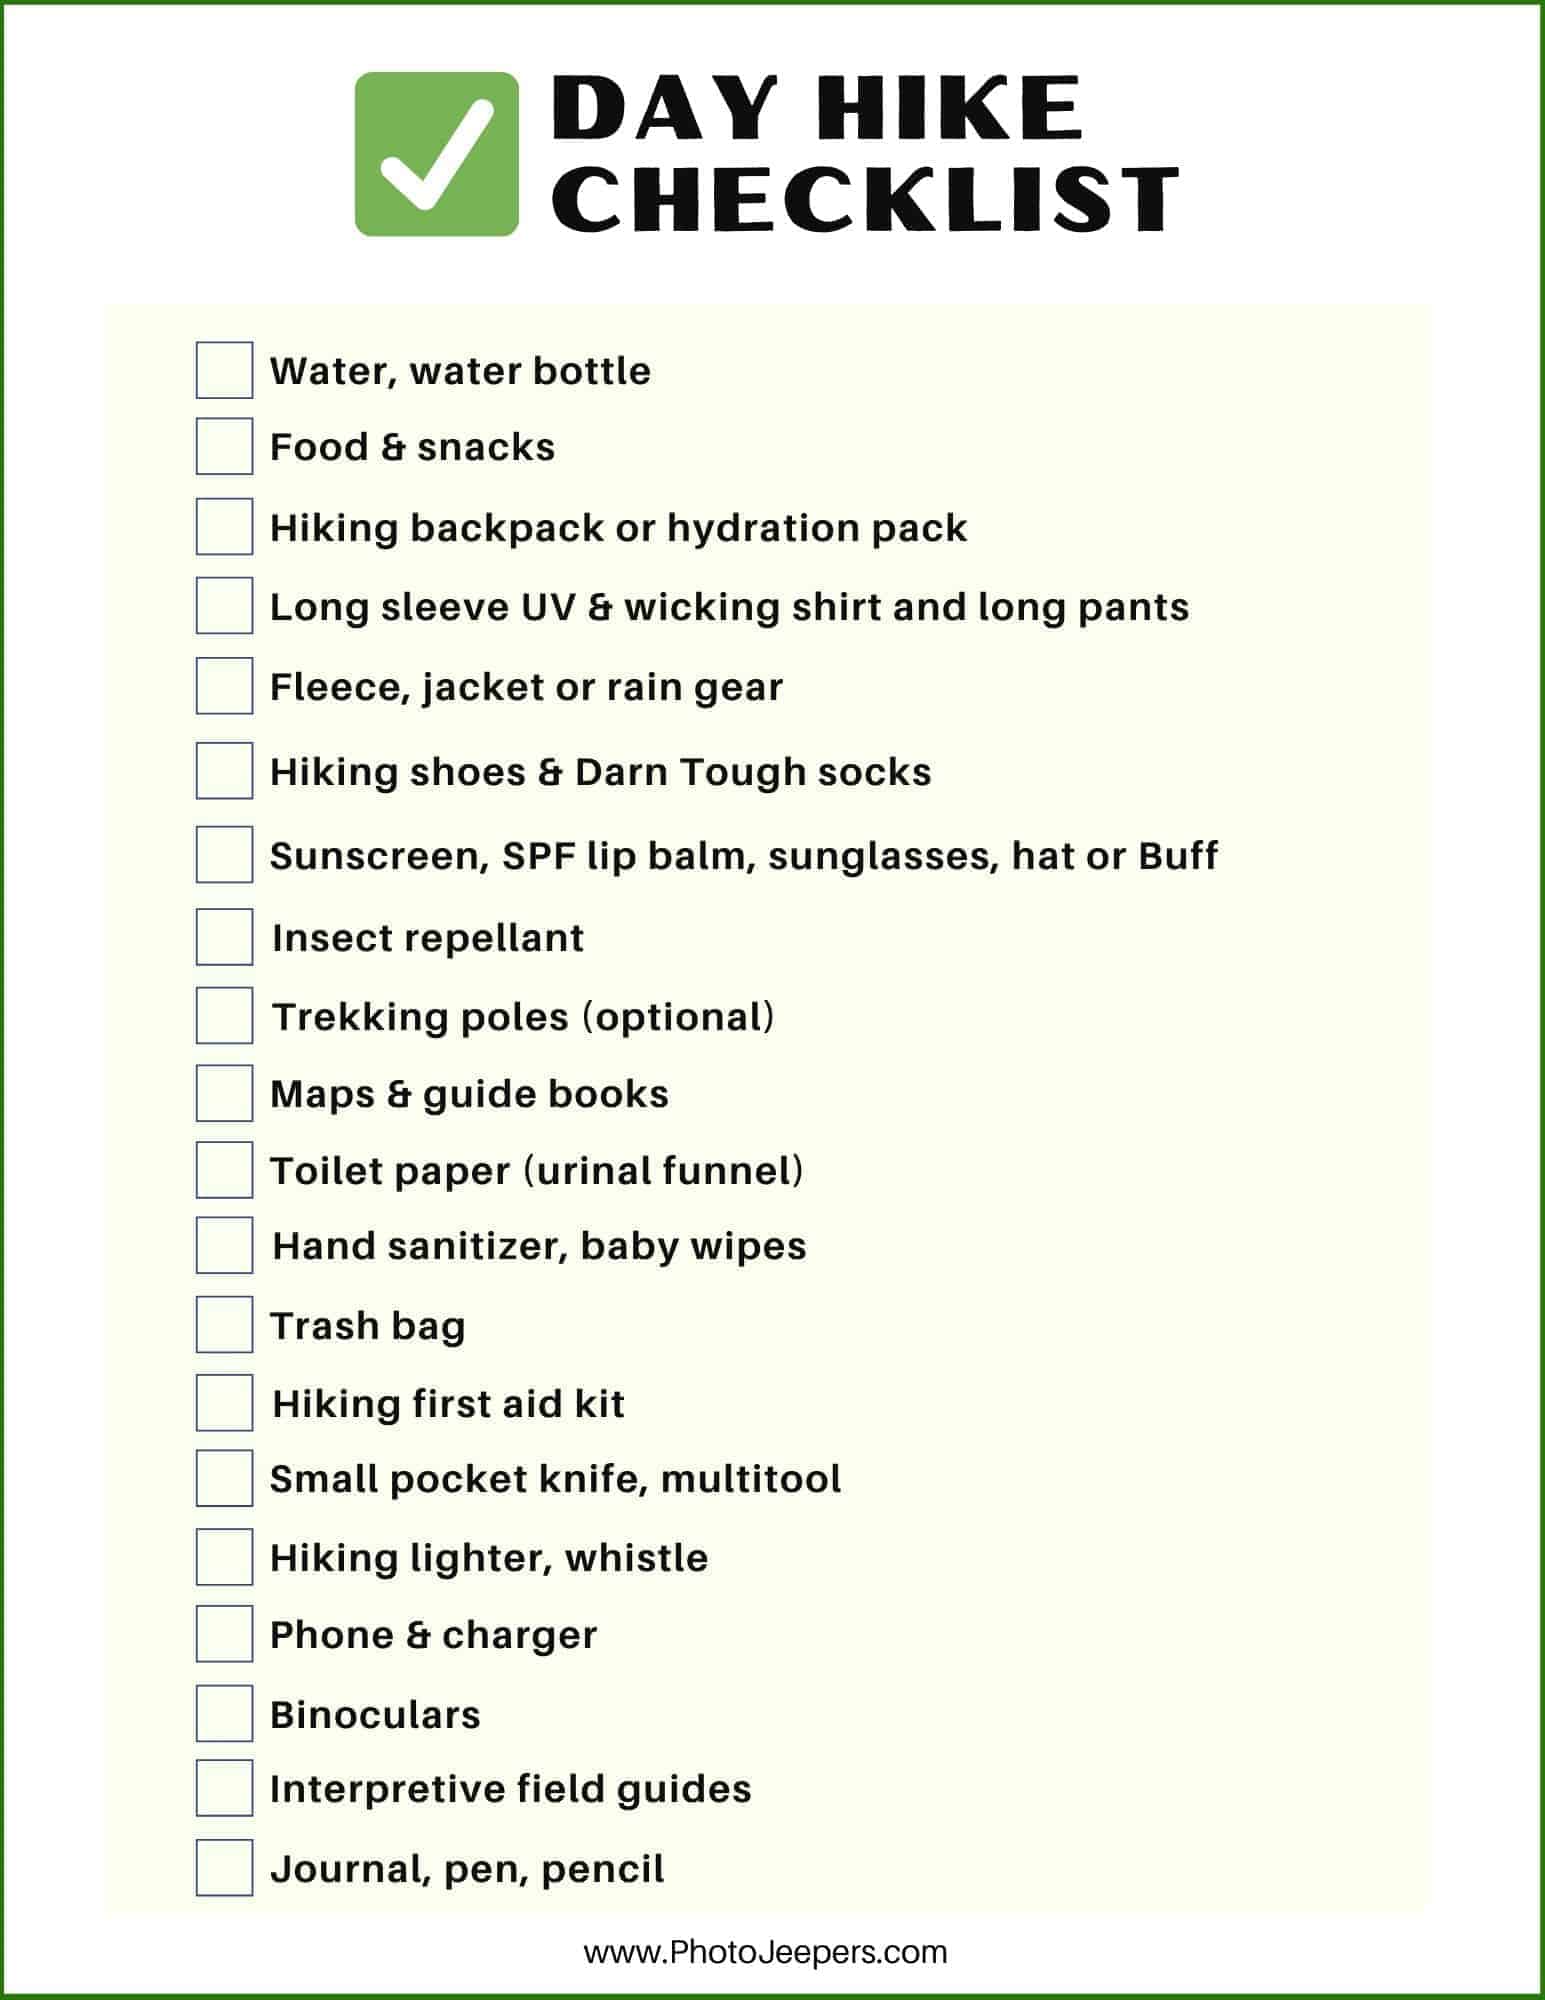 Knowing what to bring on a hike isn’t easy. If you’ve ever struggled to know what to pack for a day hike, keep reading to discover our ultimate day hike checklist! #hike #hiking #hikinggear #photojeepers